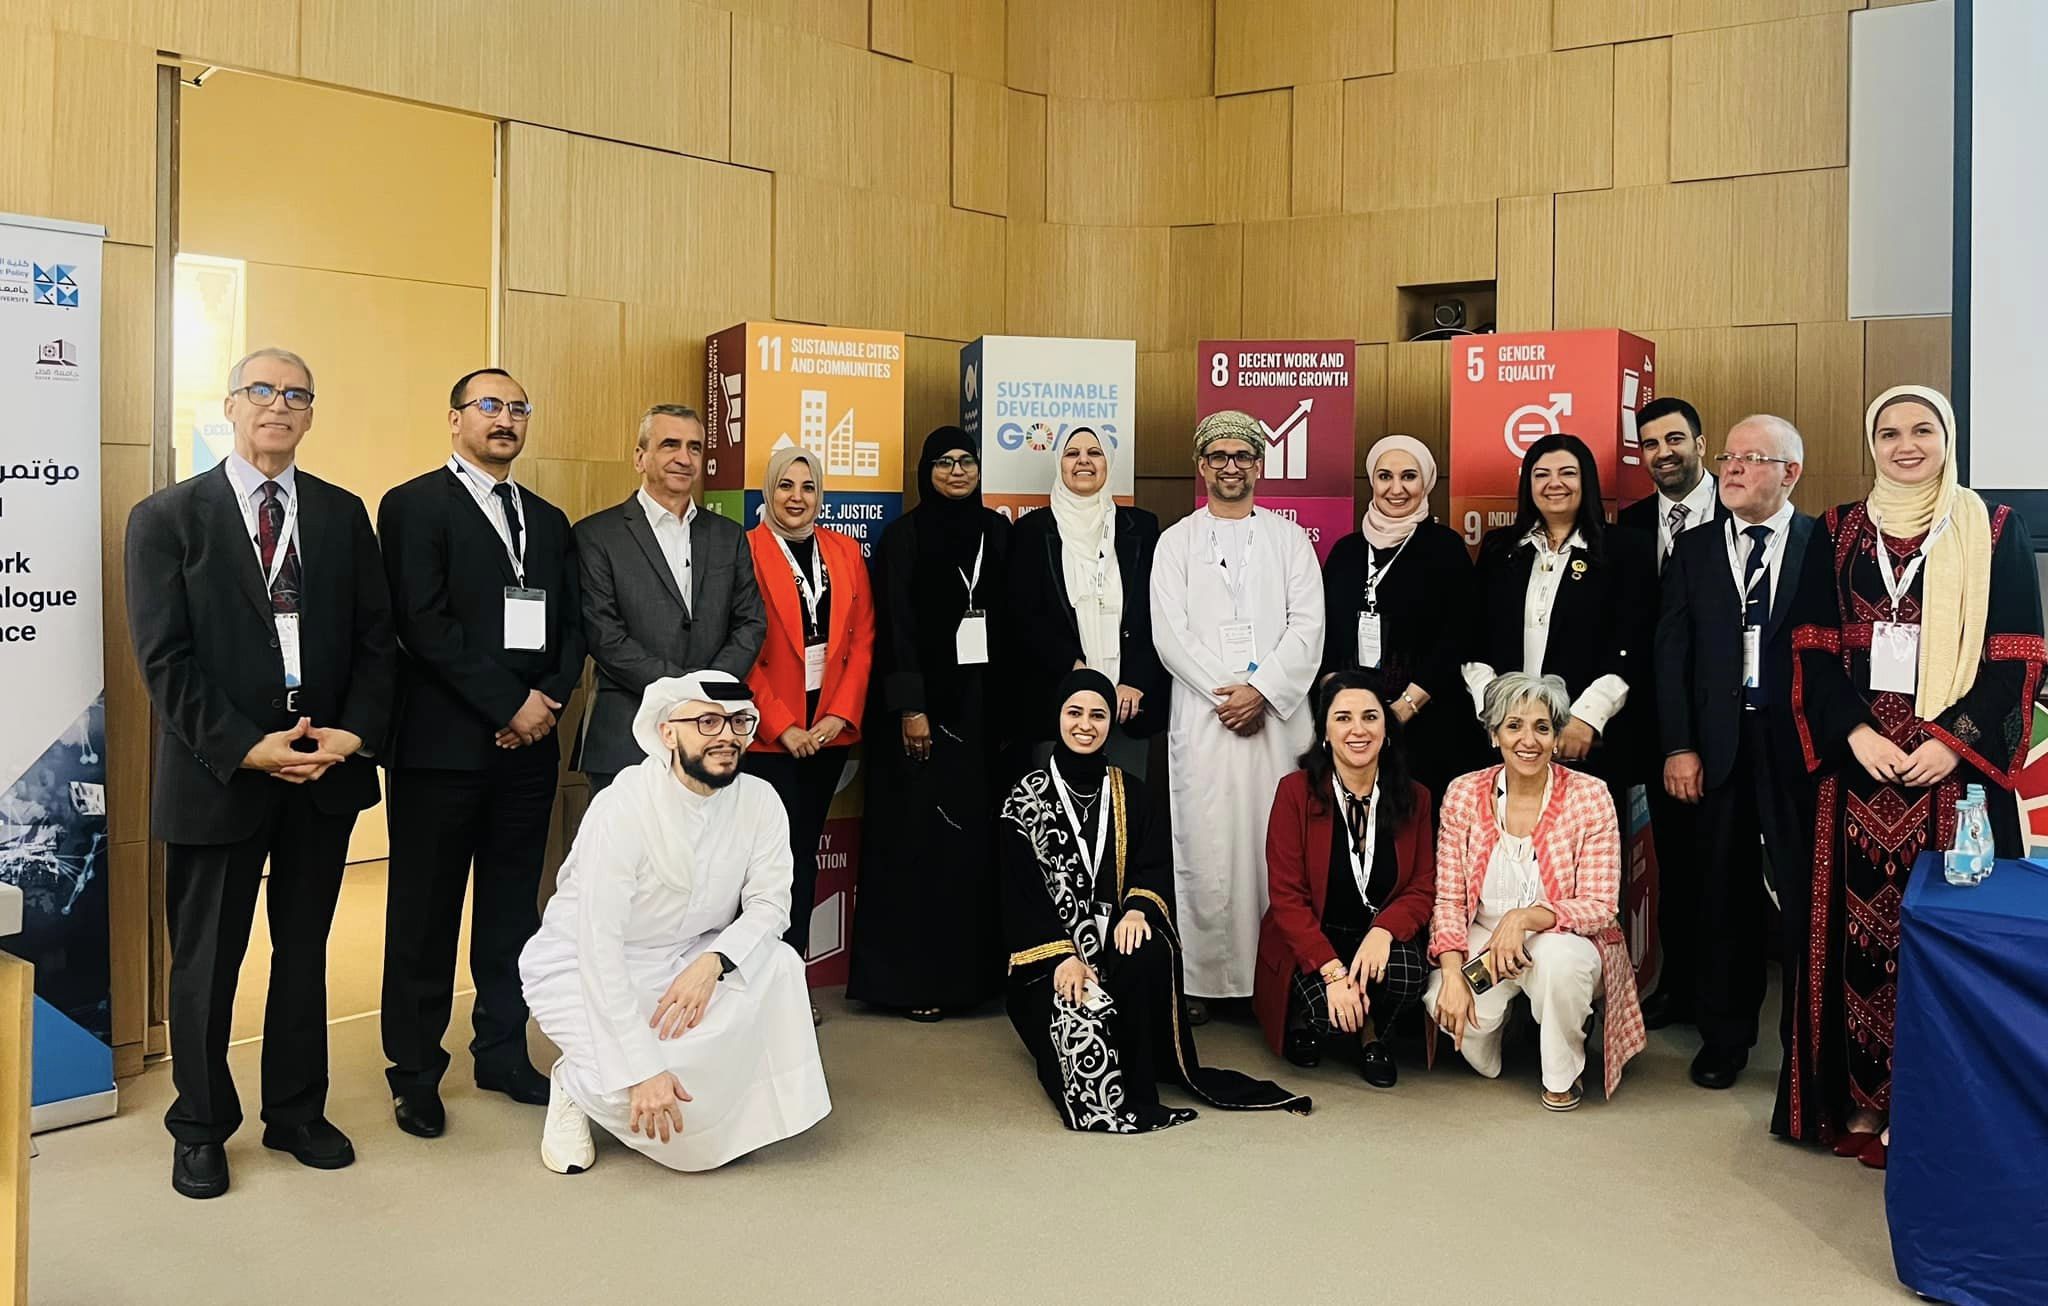 An AAUP Student Majoring in Optometry, Renad Atwan, Participates in the Fourth Annual Meeting of the Academic Network for Development Dialogue in Qatar